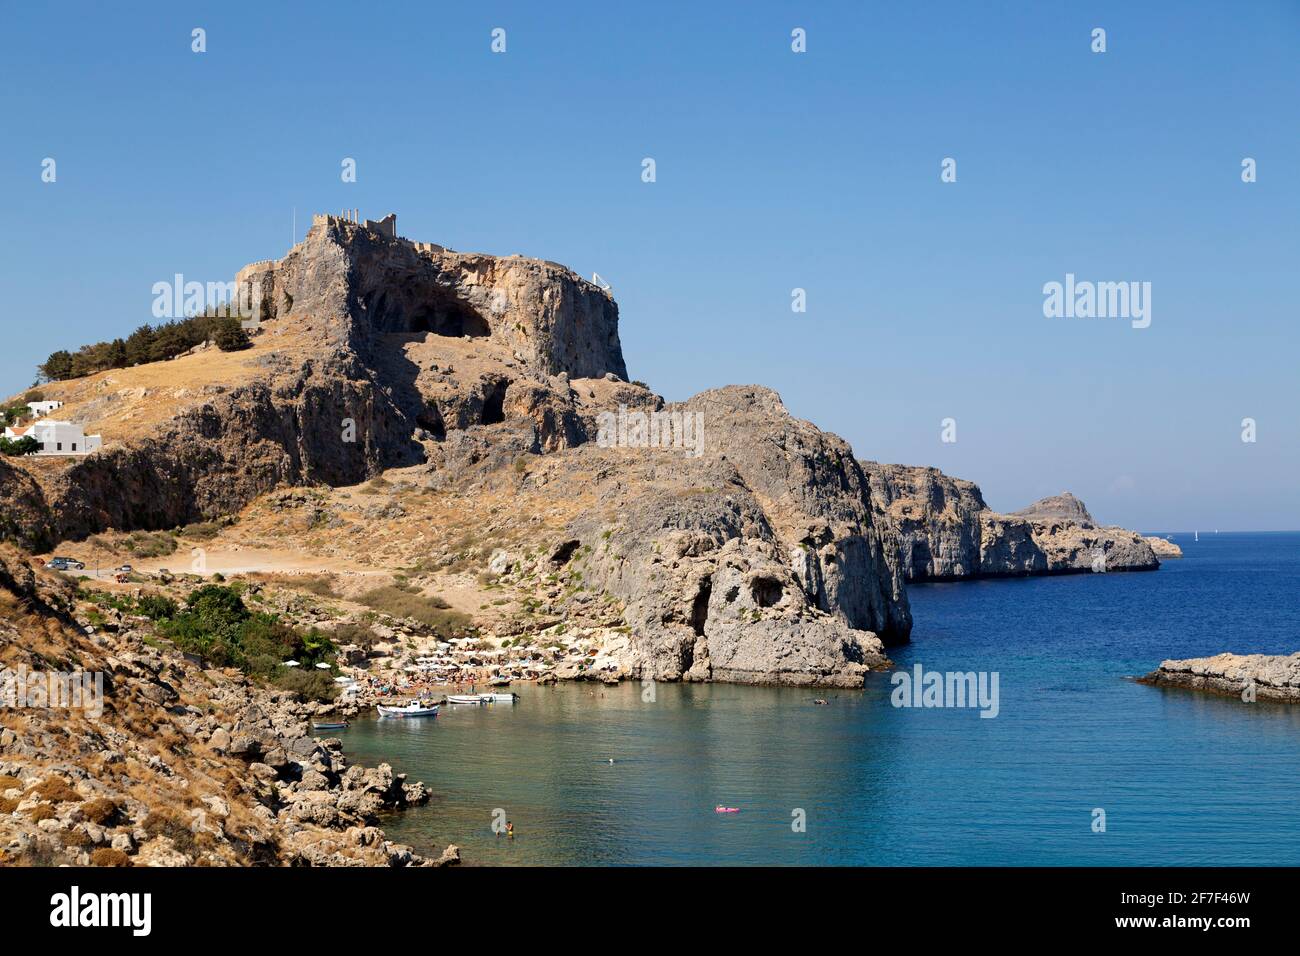 The Lindian Acropolis overlooks St Paul's Bay in Lindos on Rhodes, Greece. The ancient monument stands under a clear blue sky. Stock Photo